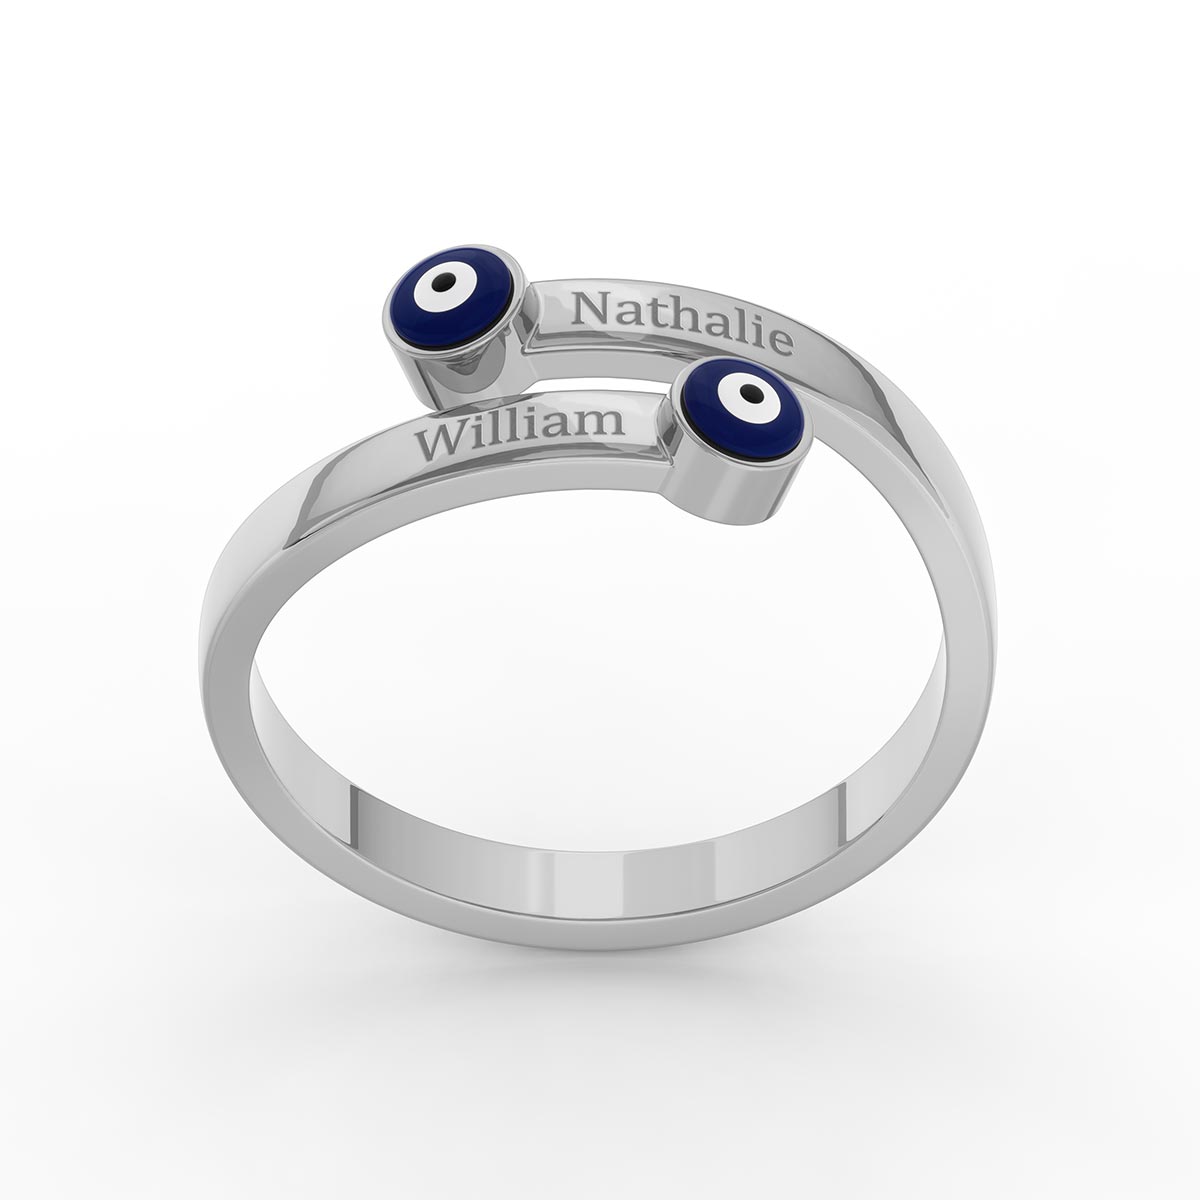 Double Evil Eye Bypass Ring with Personalized Engravings